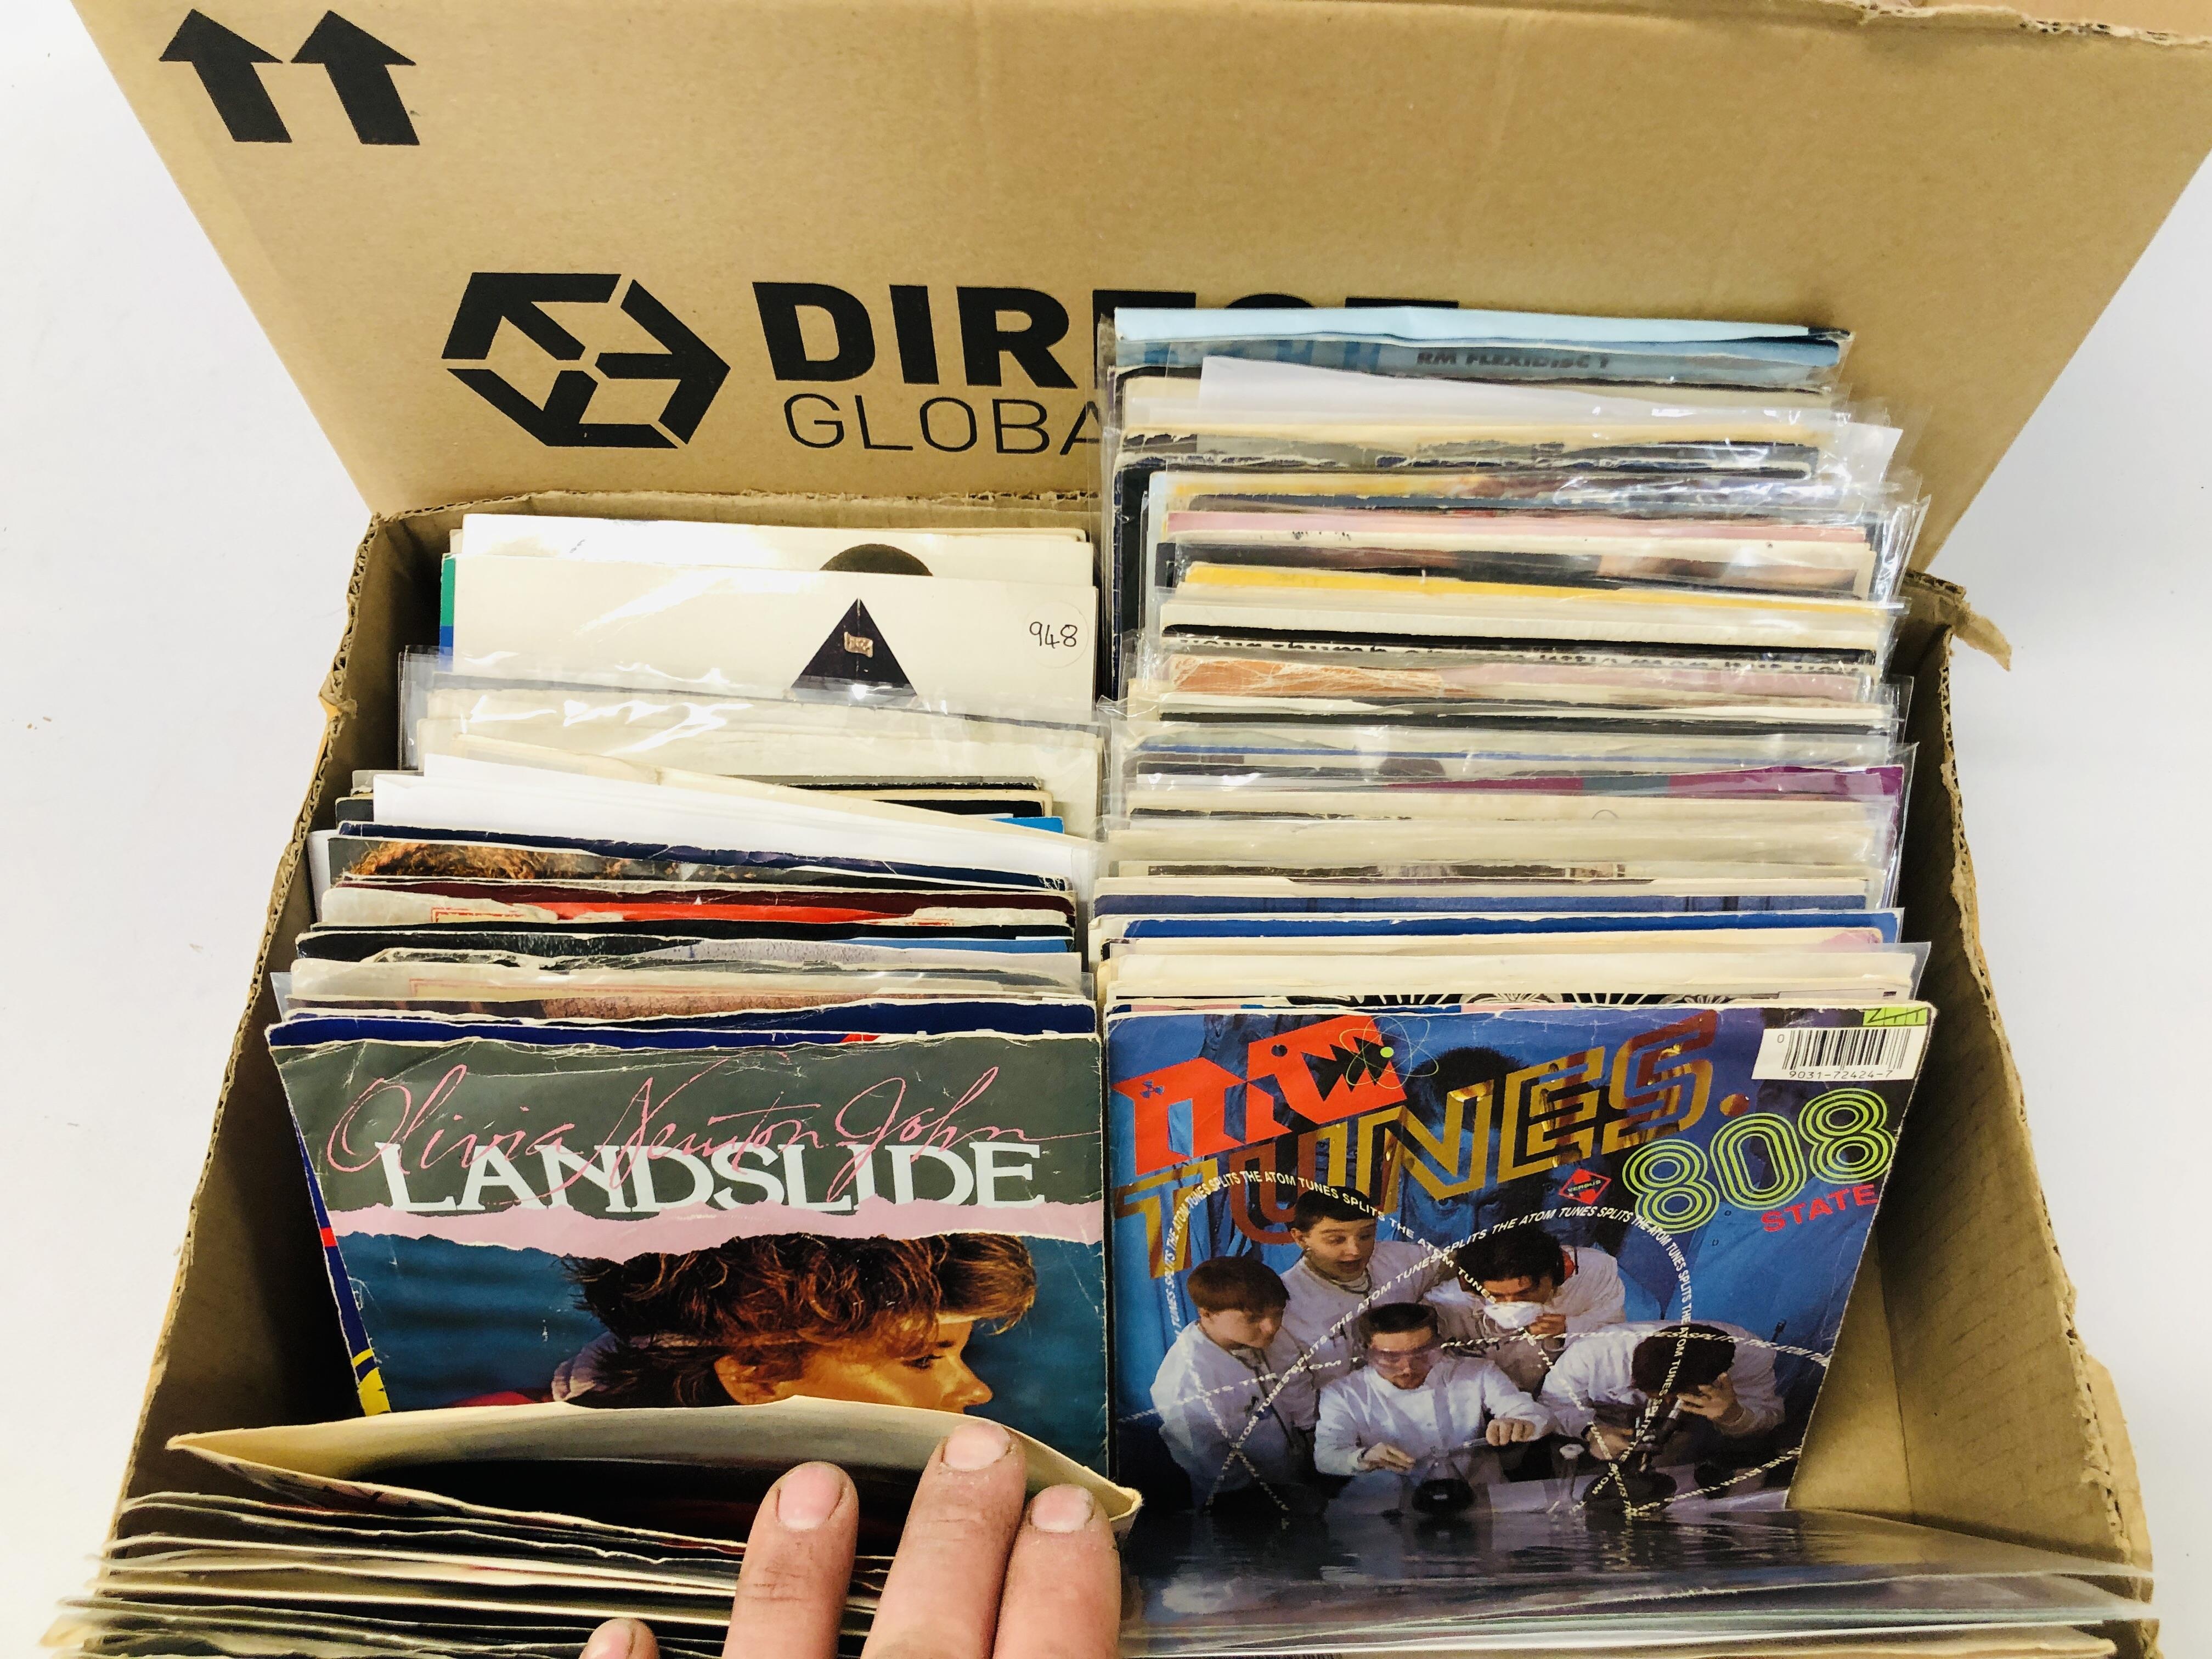 2 BOXES CONTAINING A QUANTITY OF 45 RPM SINGLES TO INCLUDE INXS, CATHERINE WHEEL, PHIL COLLINS, - Image 4 of 10